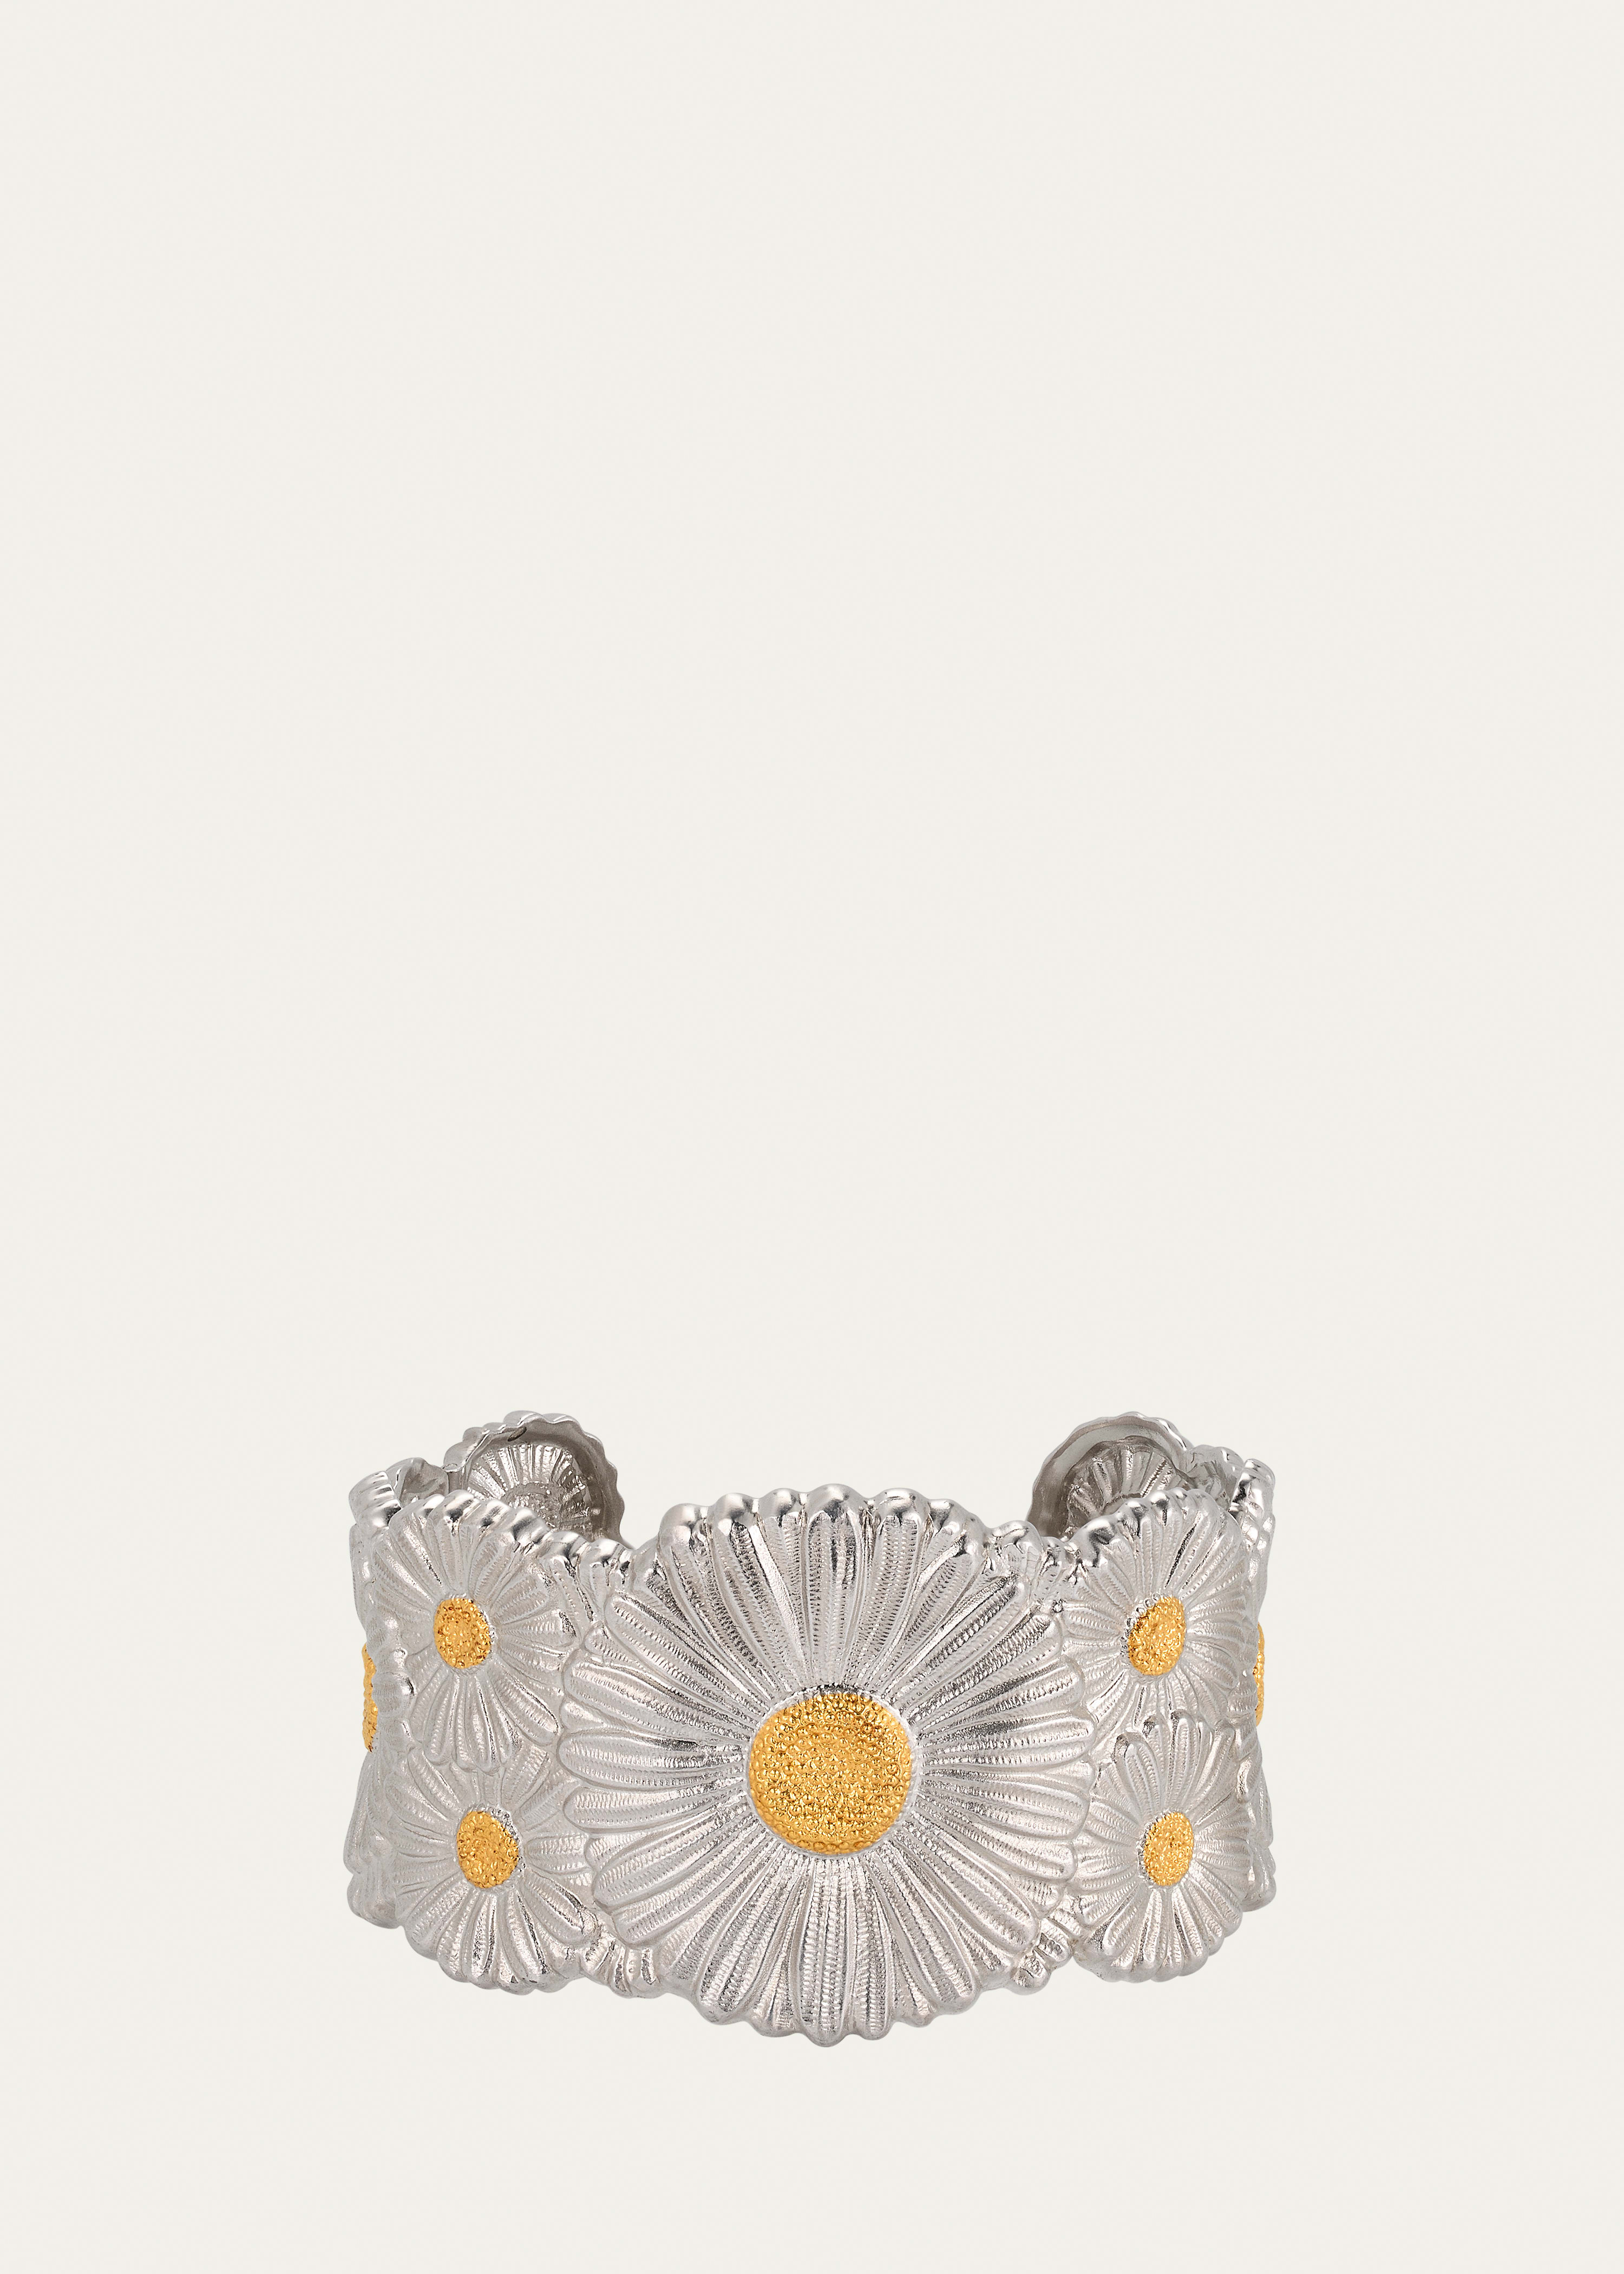 Silver and 18k Yellow Gold Daisy Blossoms Bracelet